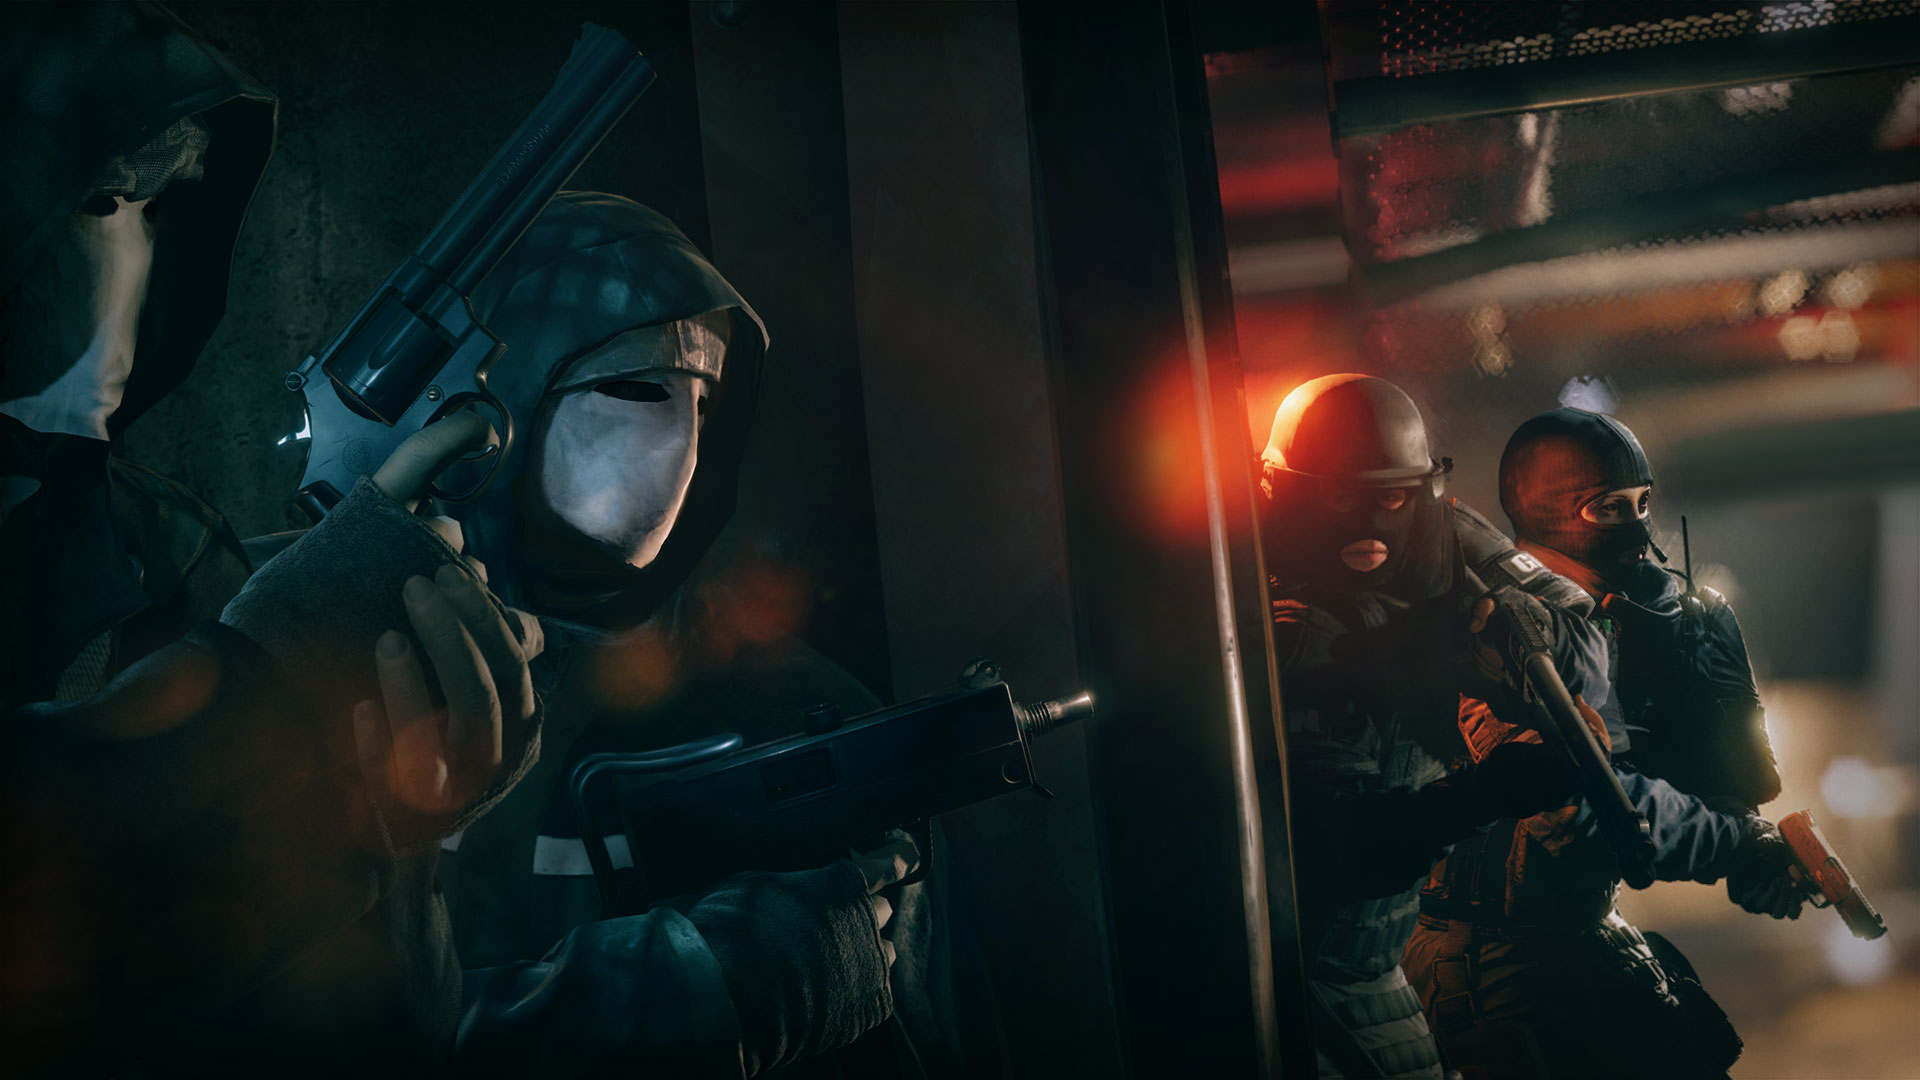 Will Rainbow Six: Siege Have a Story Campaign?